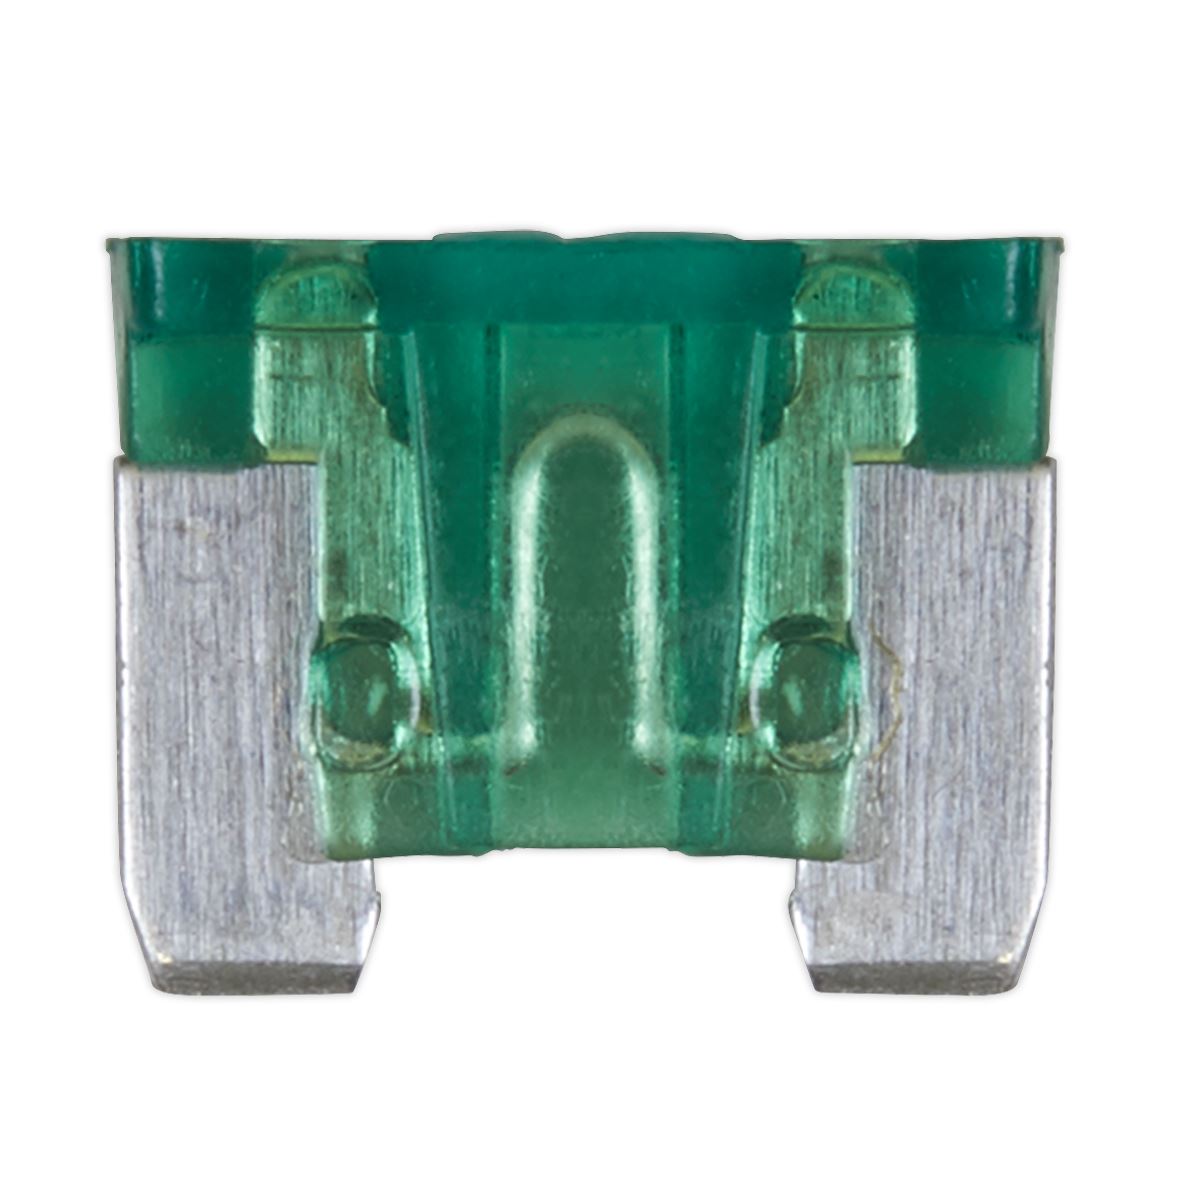 Sealey Automotive MICRO Blade Fuse 30A - Pack of 50